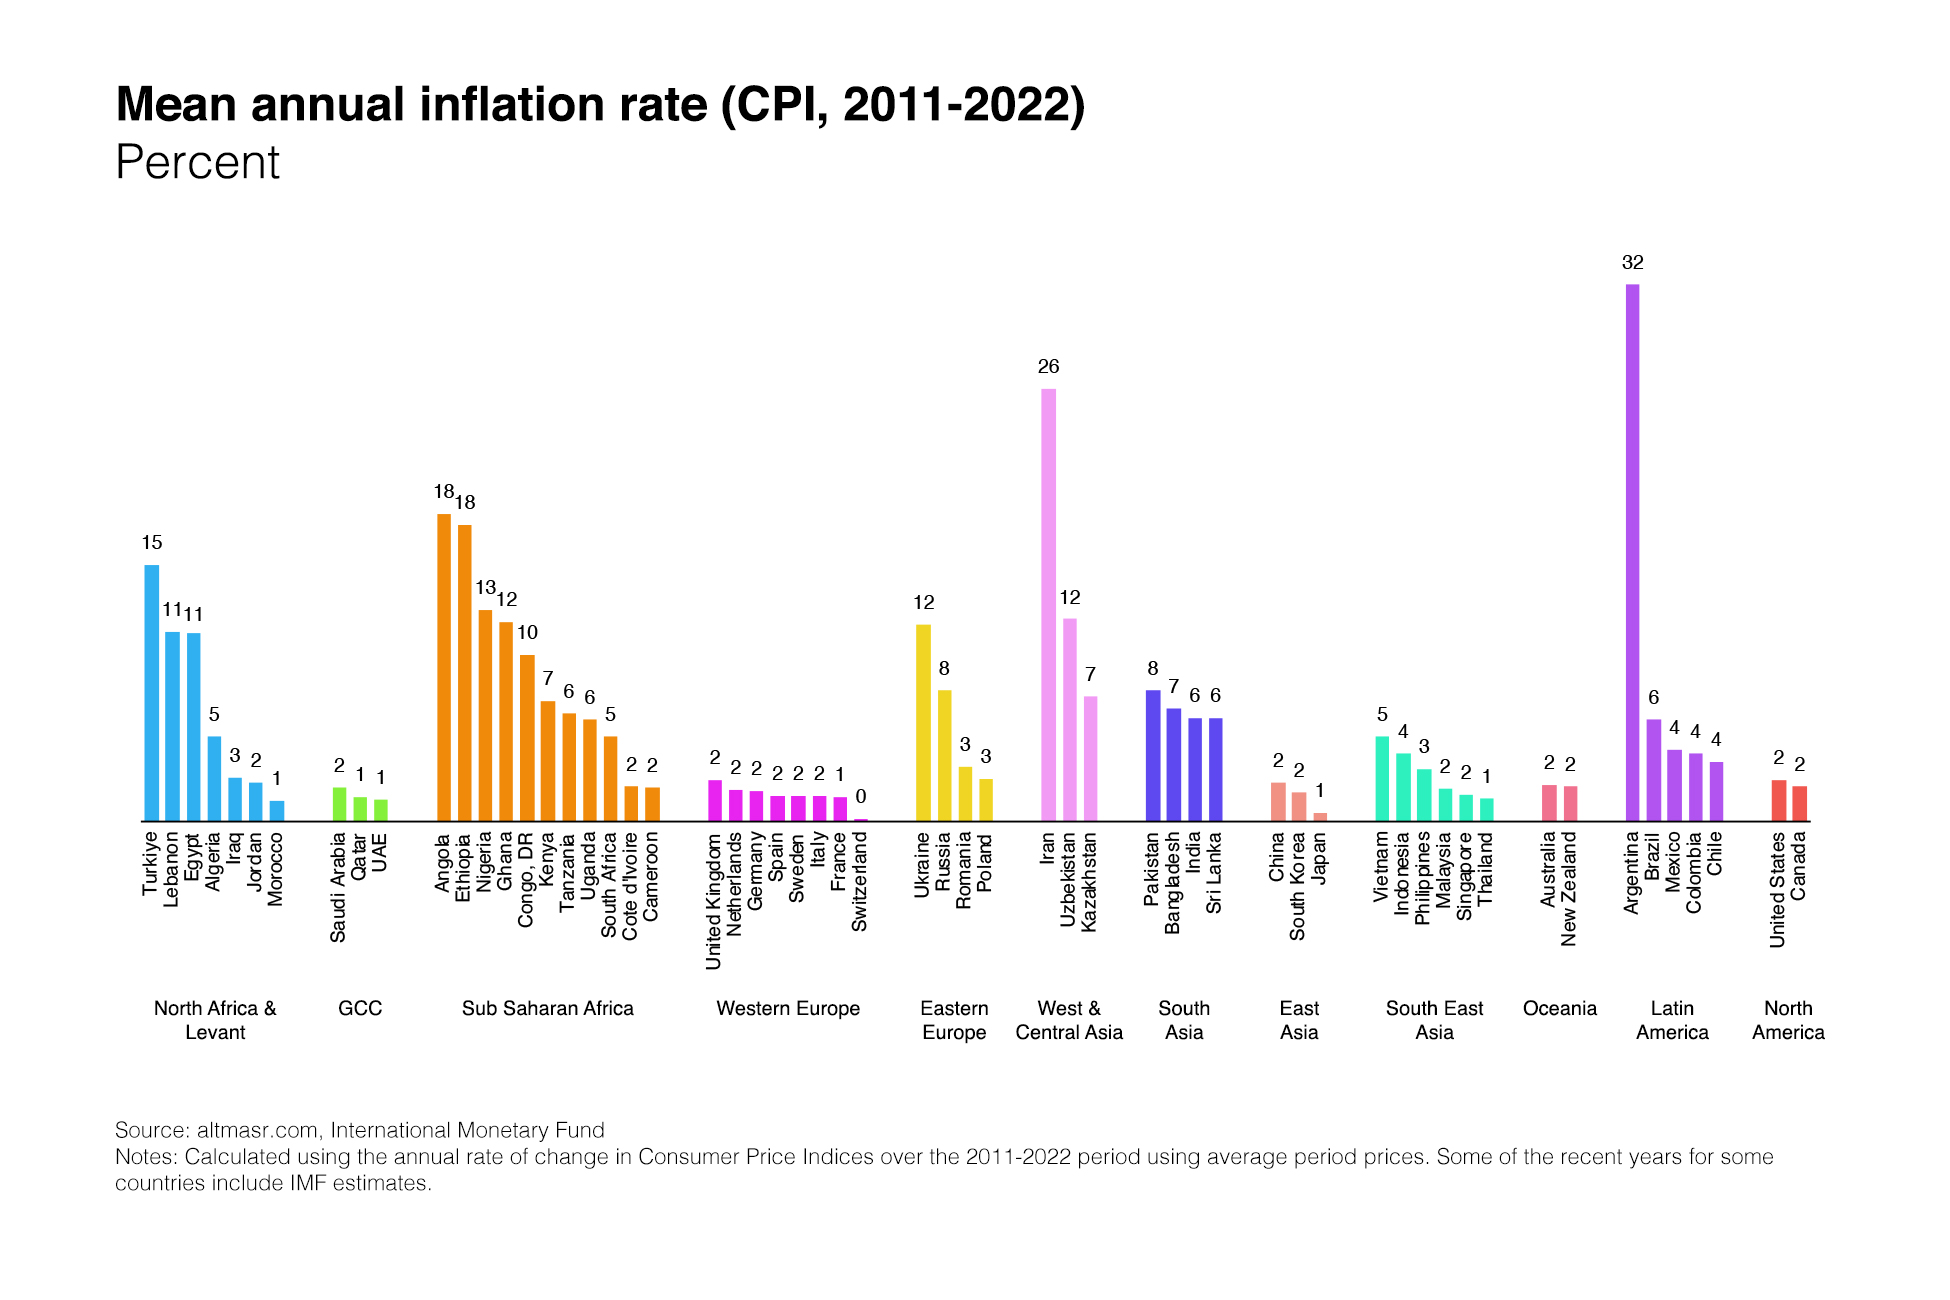 A chart showing mean annual inflation rates over a period of about one decade for various countries across the globe